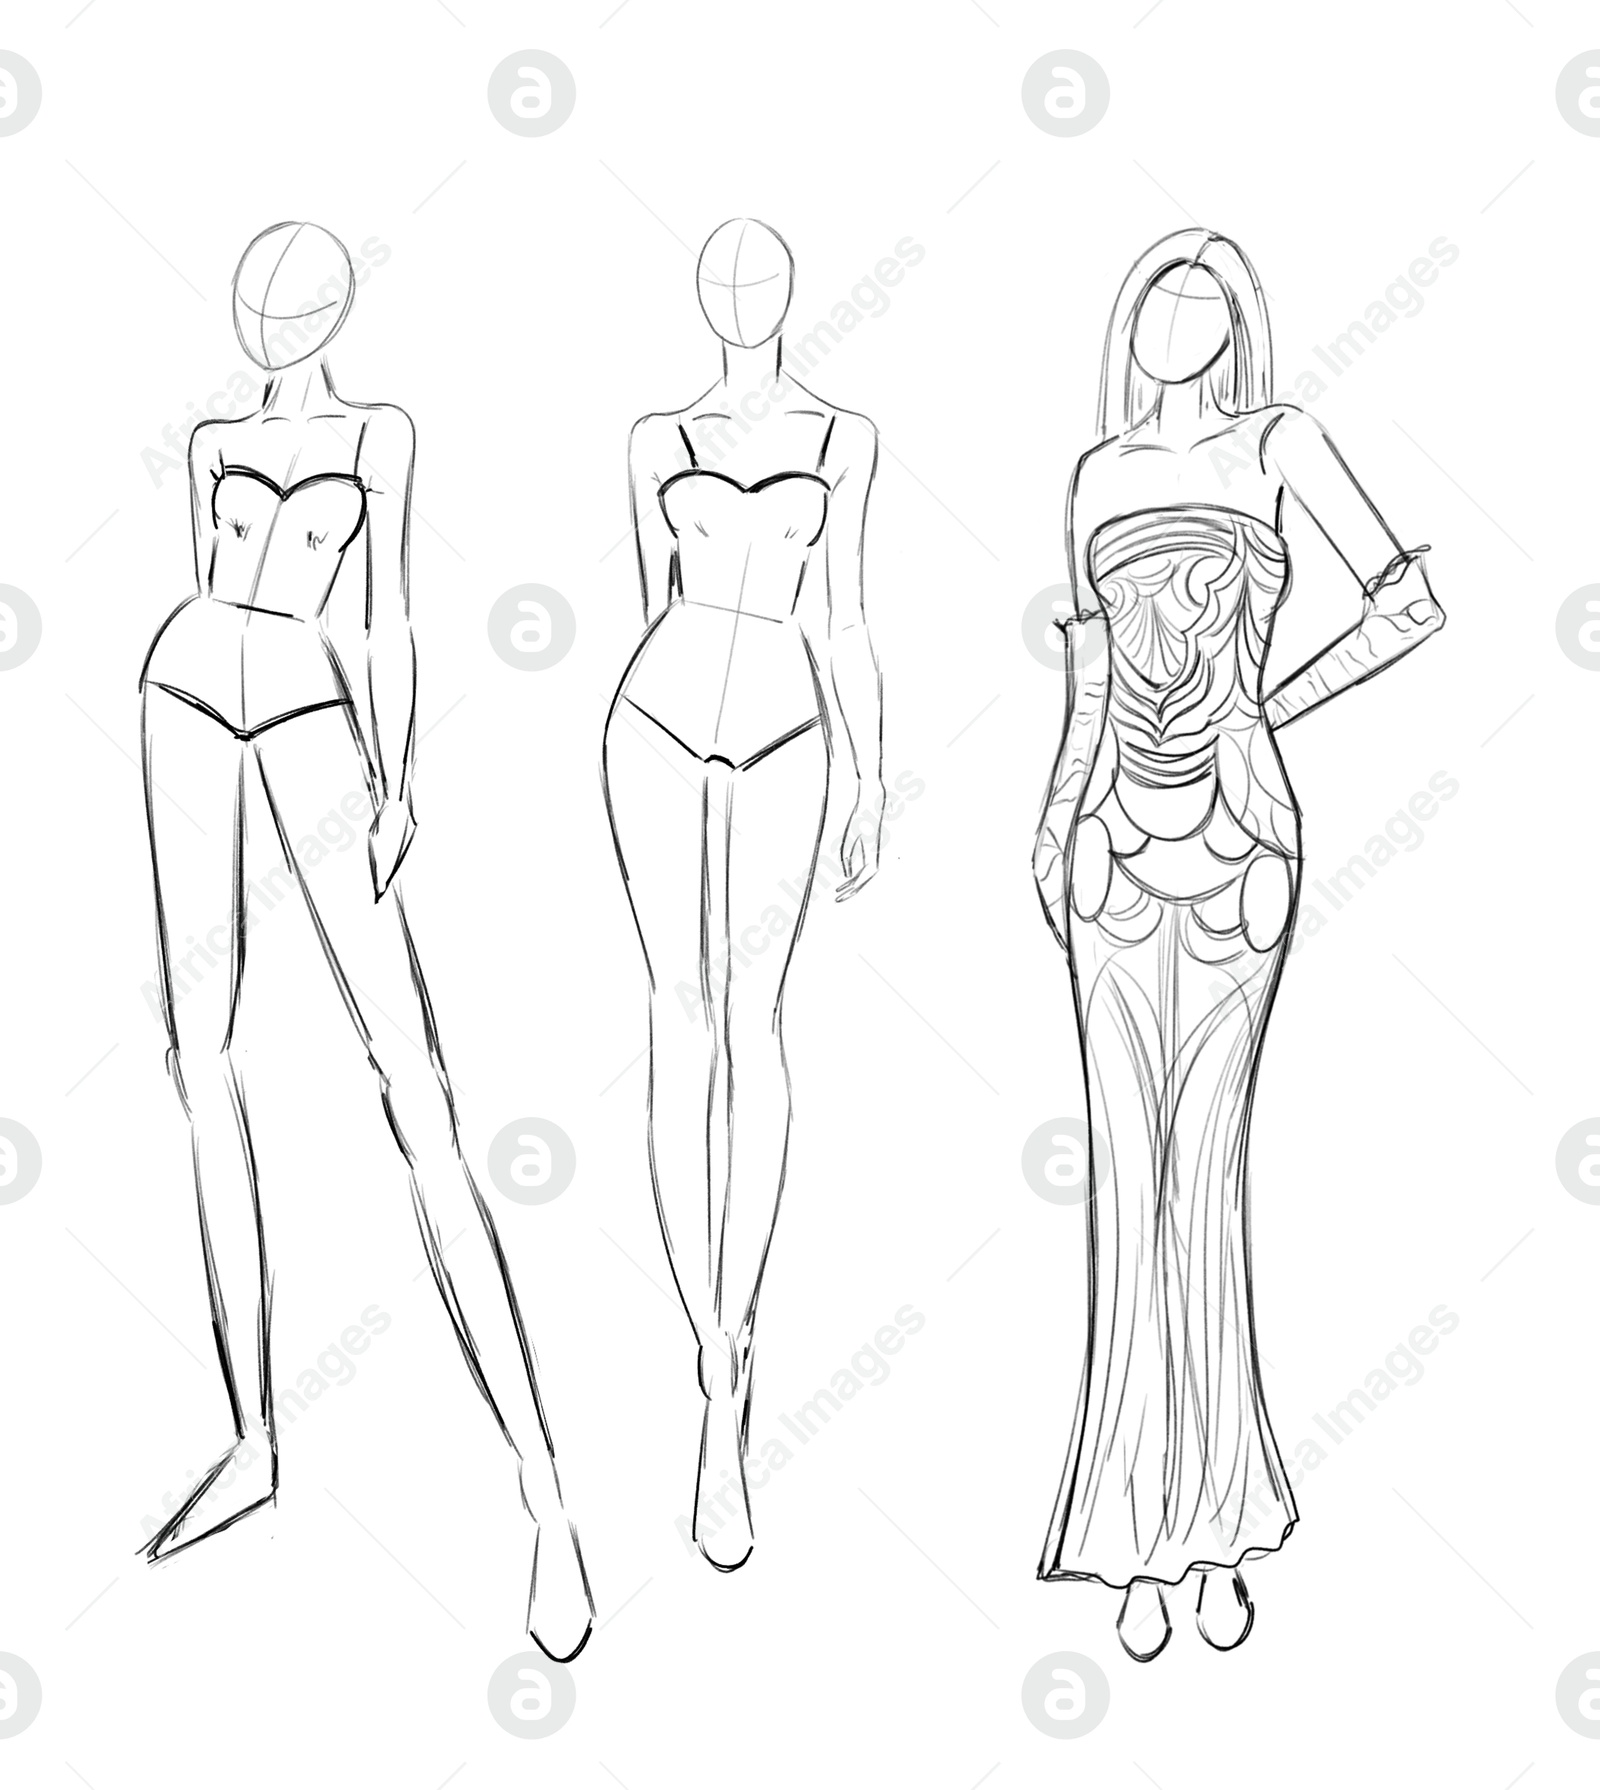 Image of Fashion designer. Sketches of woman in stylish drsss on white background